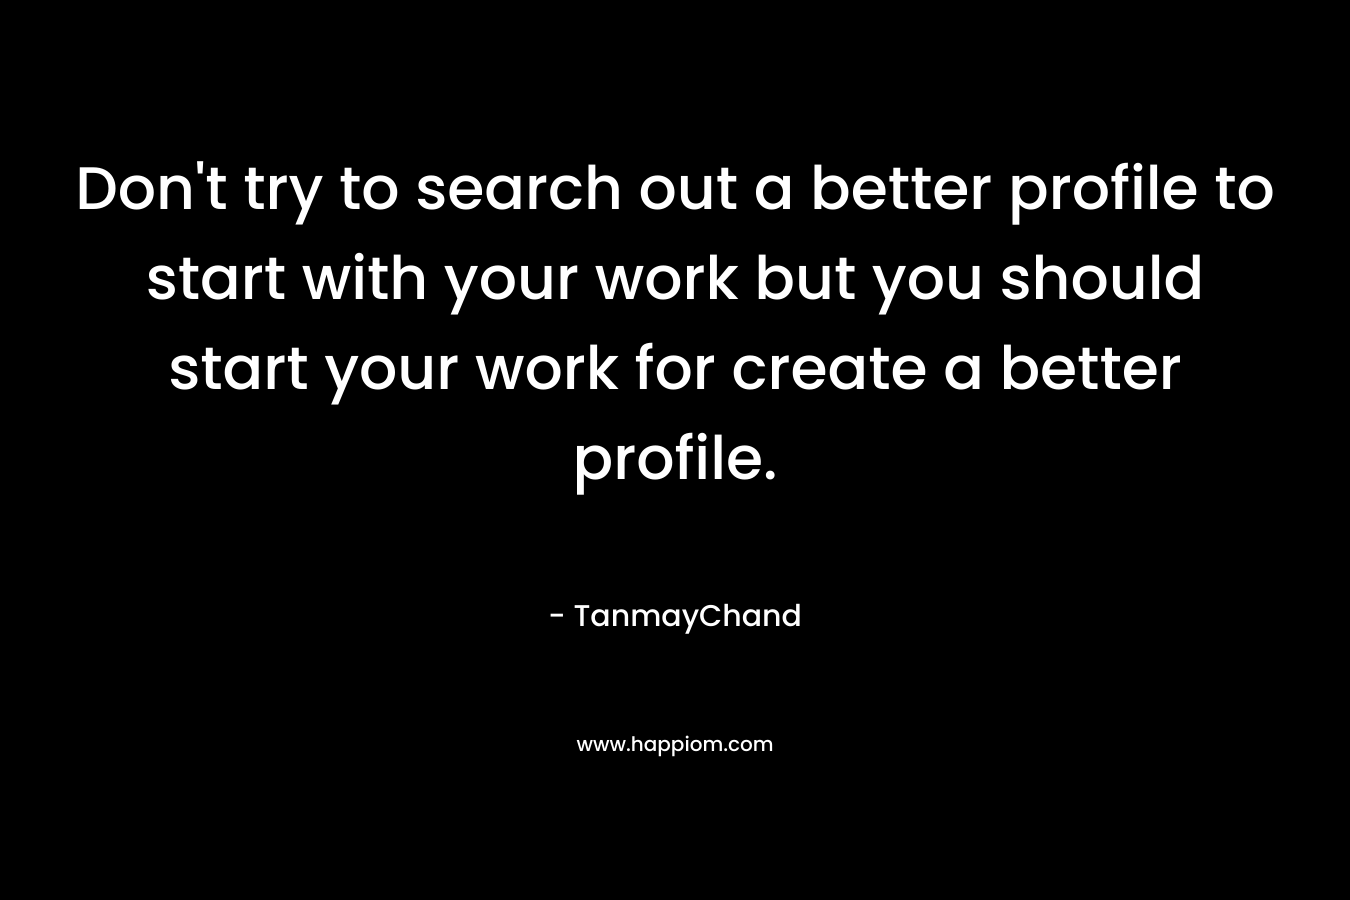 Don’t try to search out a better profile to start with your work but you should start your work for create a better profile. – TanmayChand